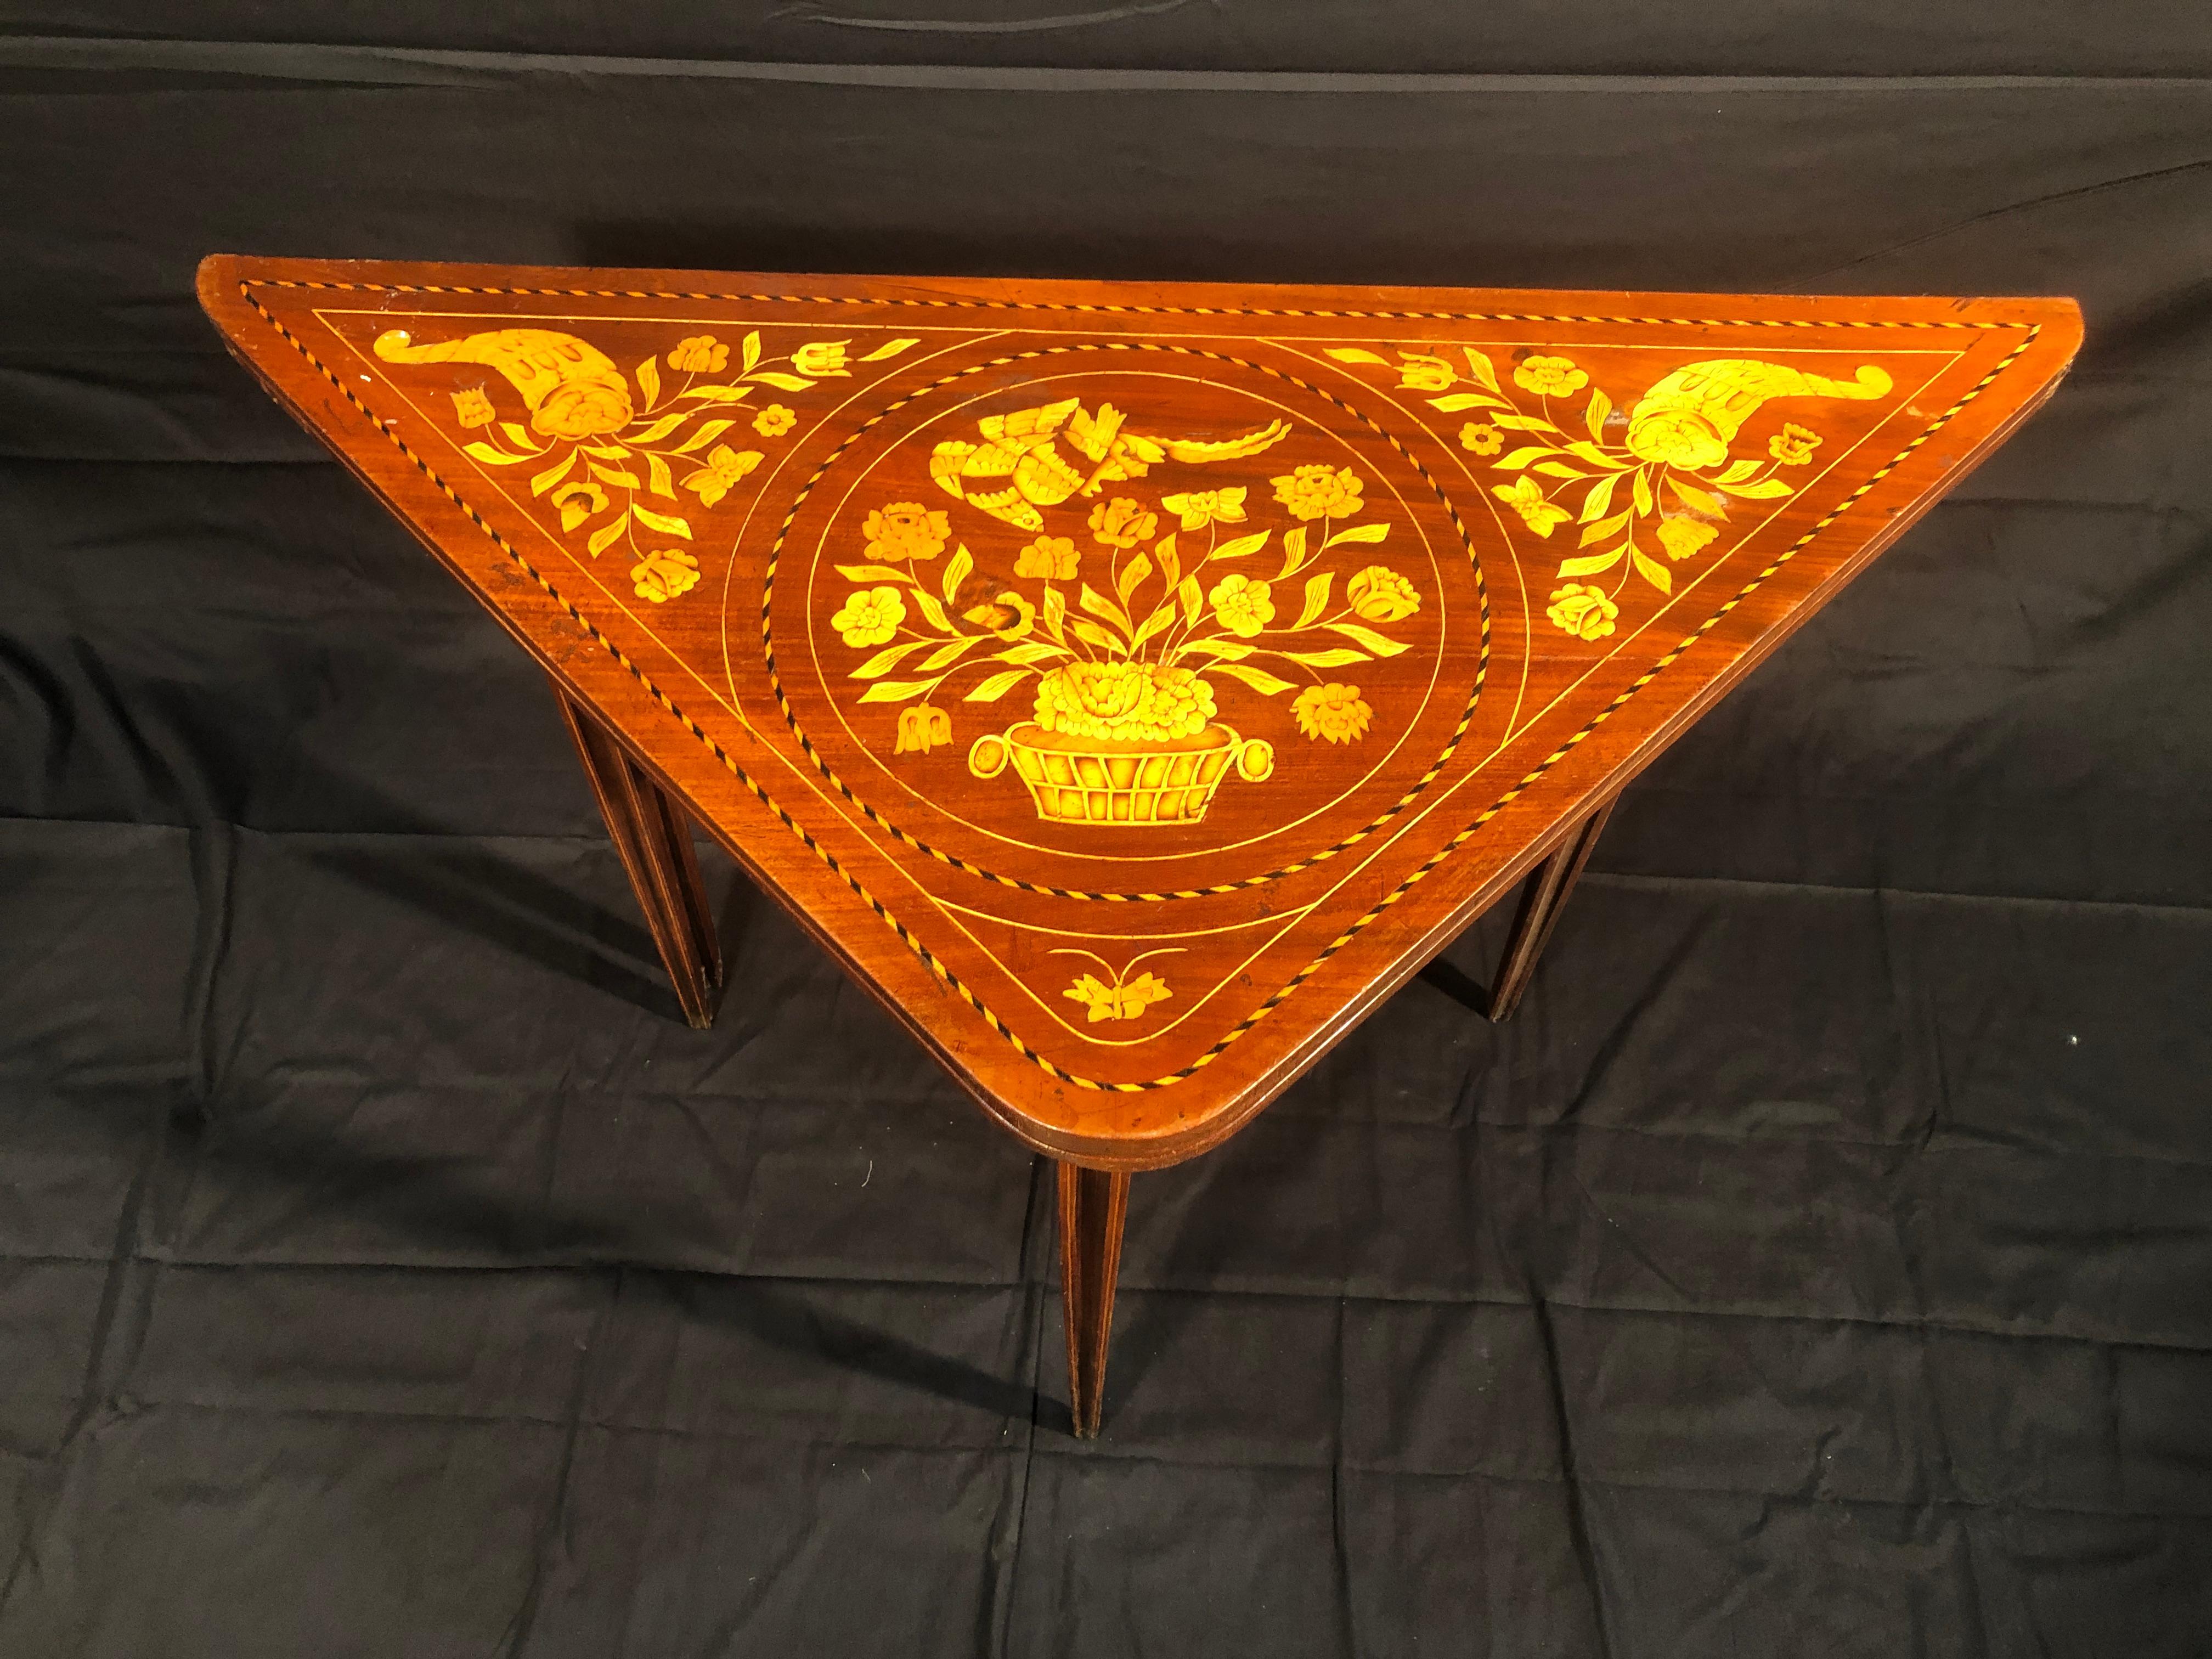 Dutch gaming table, circa 1840, triangle shape, possibility of doubling the floor, finely inlaid with floral motifs, in mahogany wood.
You can close it up to make it almost flat. To be restored.